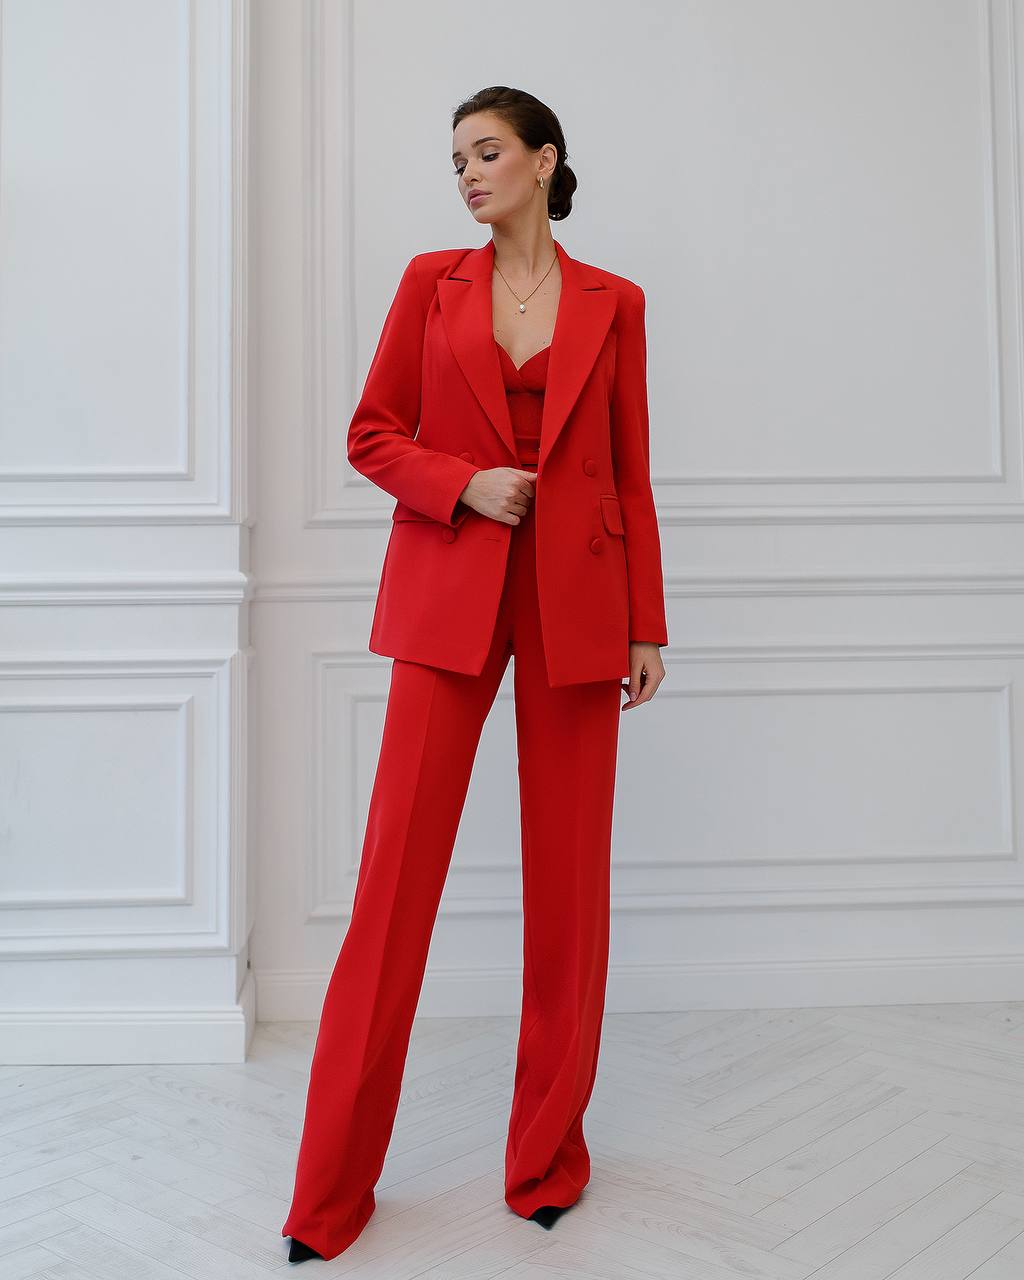 a woman in a red suit stands in front of a white wall